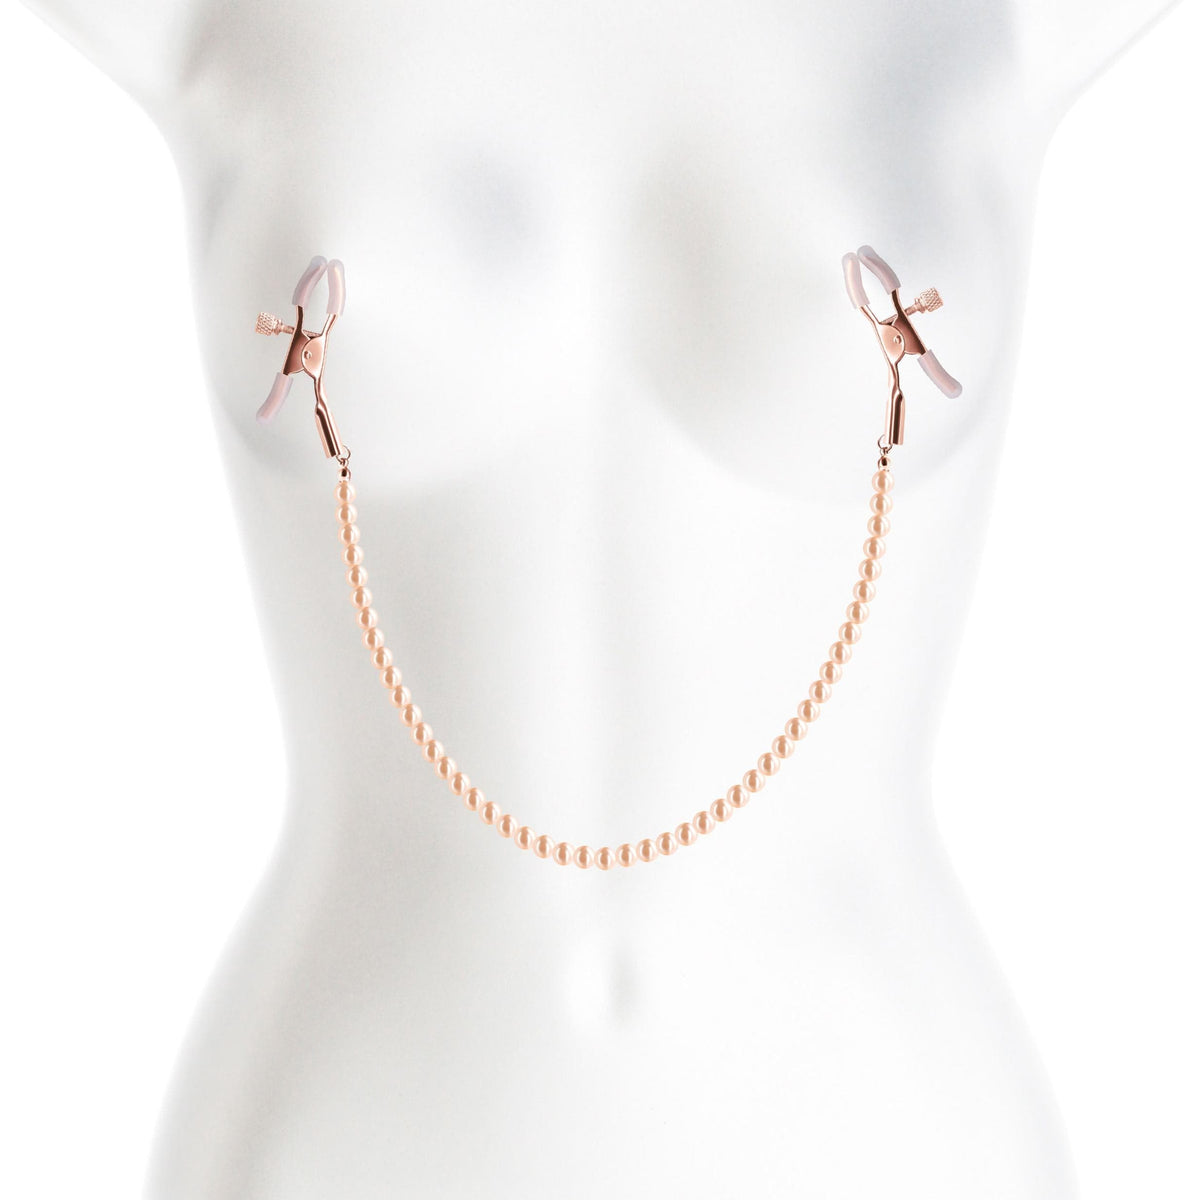 bound nipple clamps dc1 rose gold